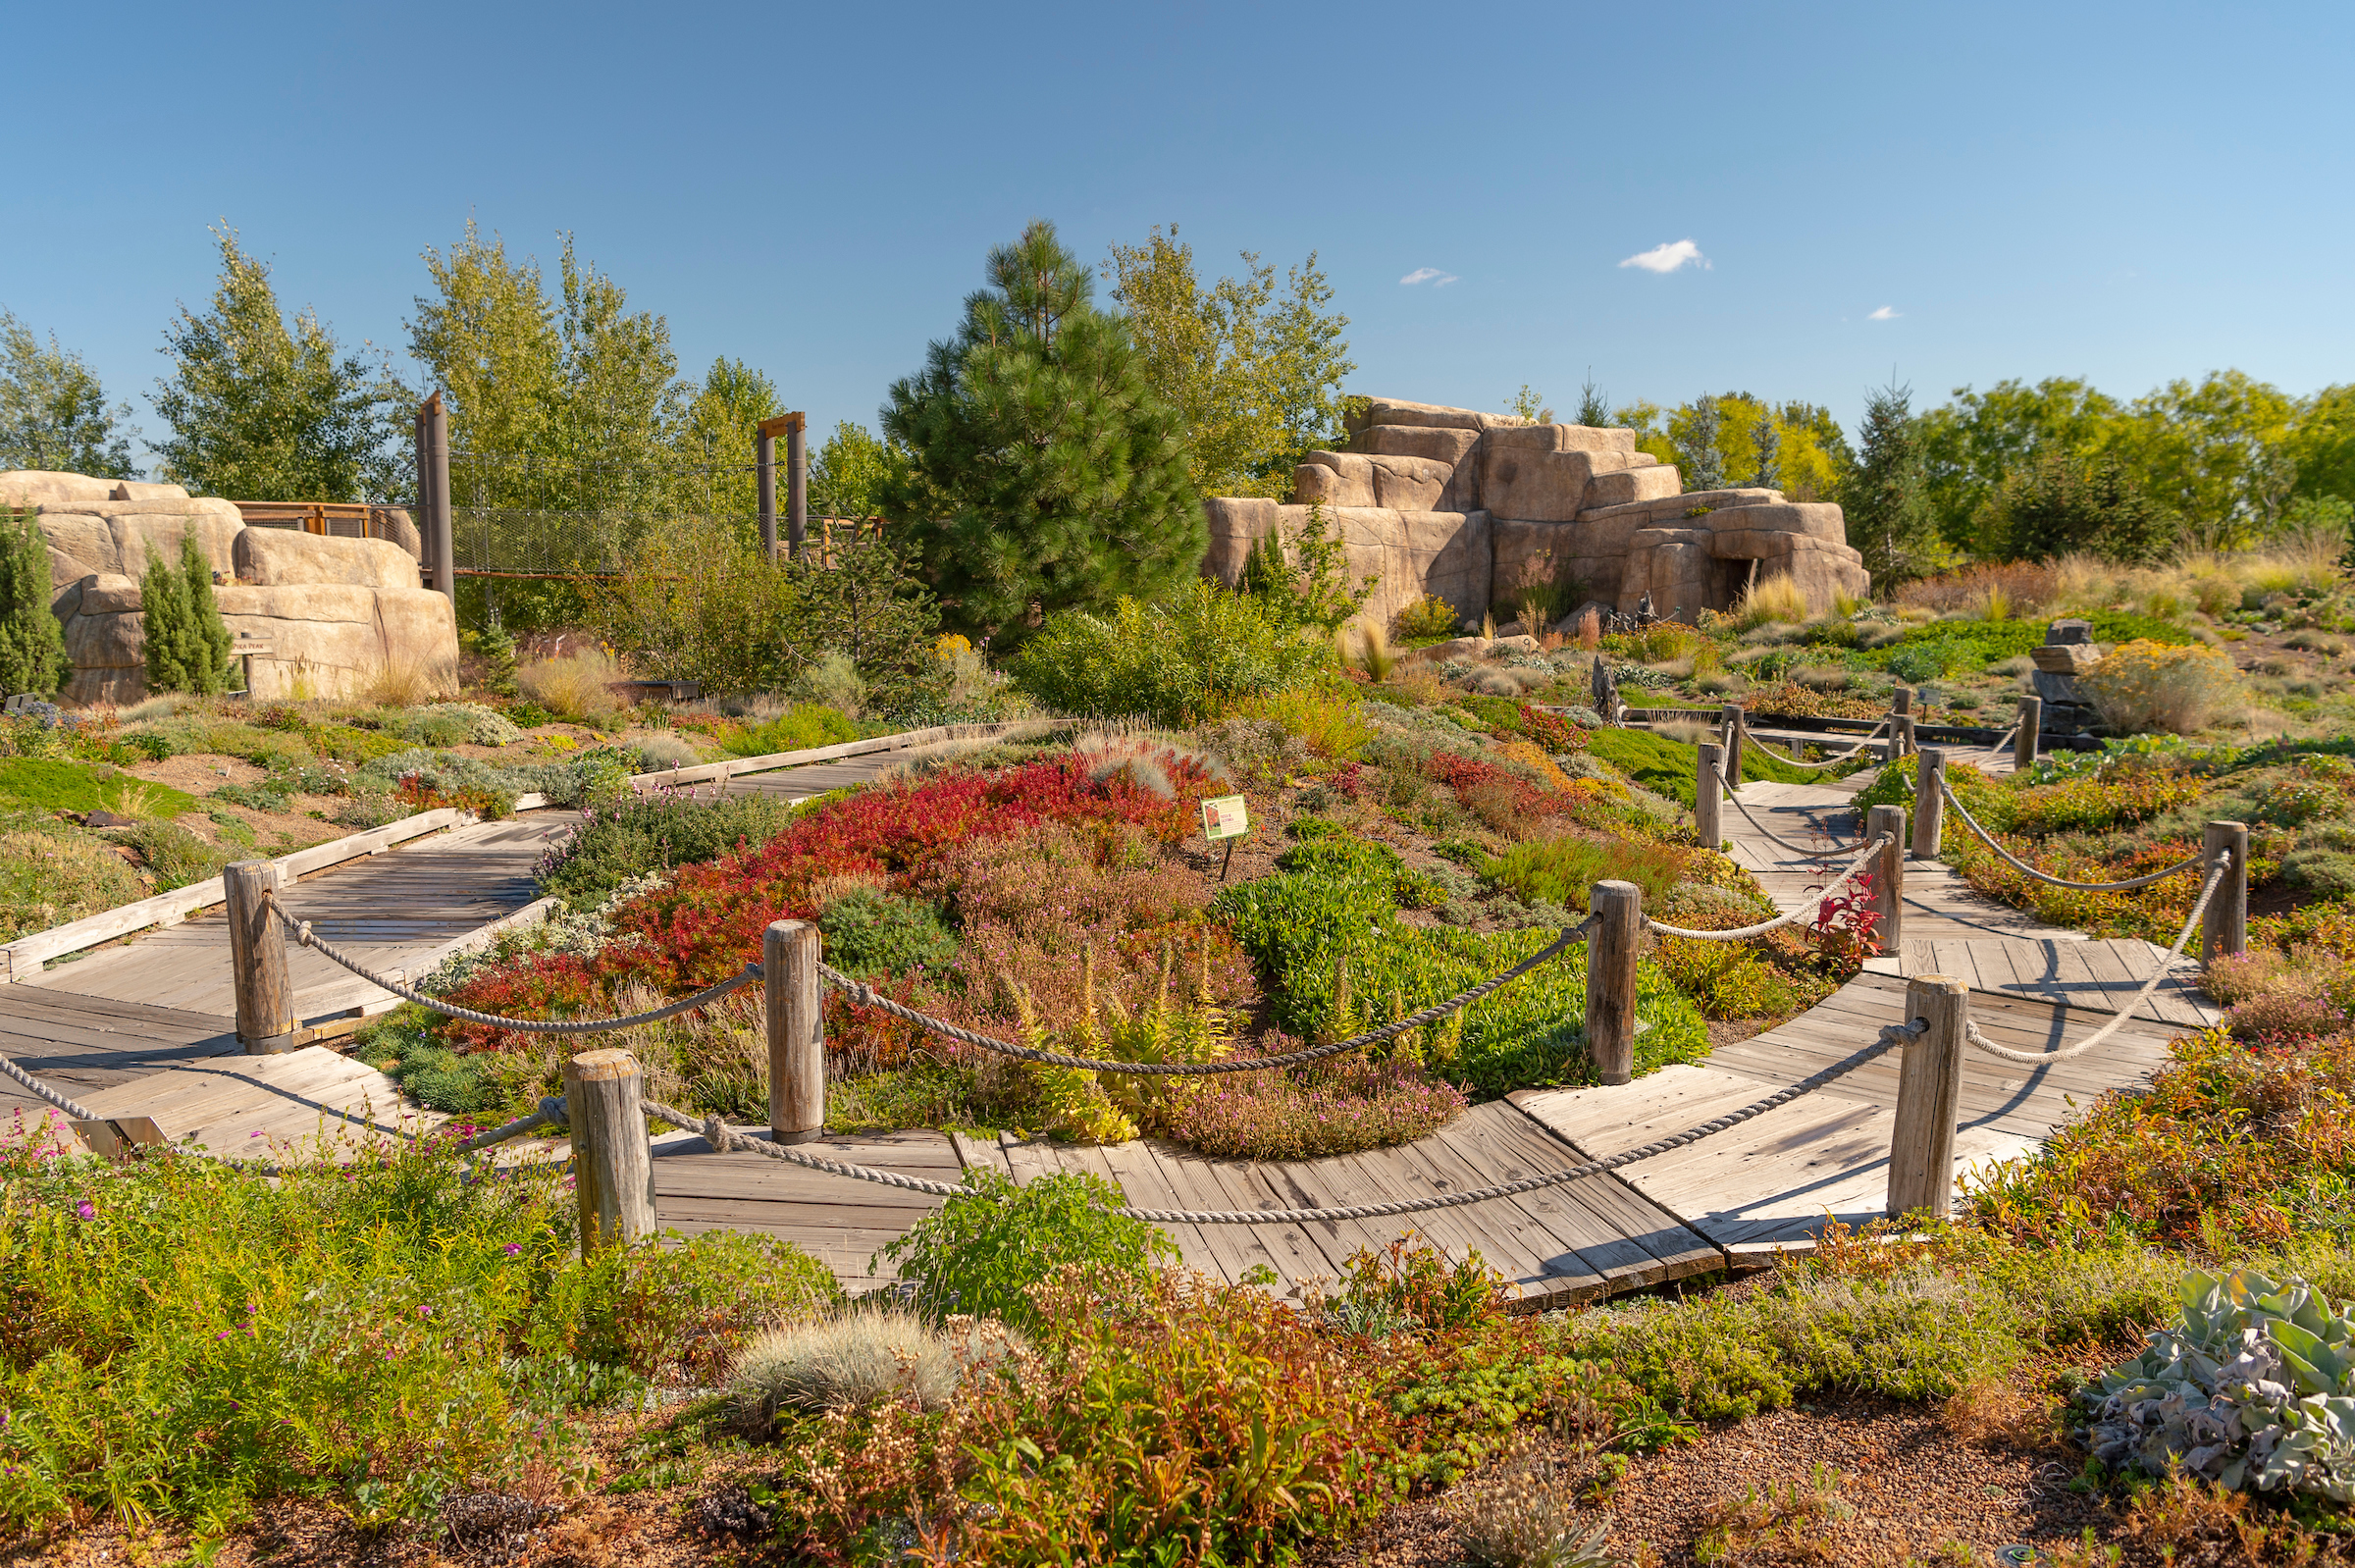 A wood-planked path winds through a garden of shrubs and trees with a stone structure in the background.